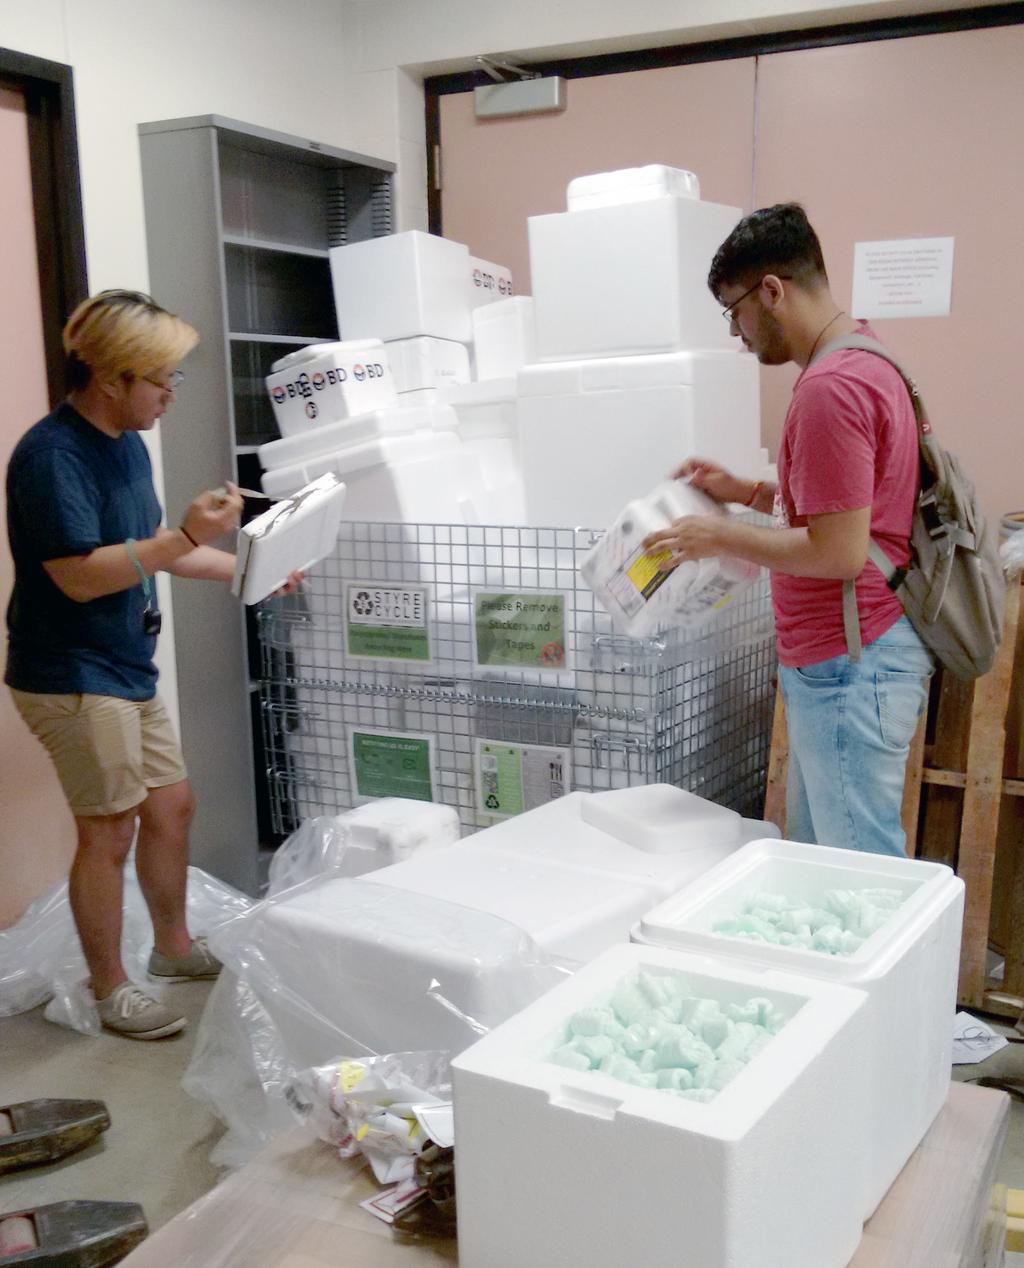 The student-run Styrecycle program is one of several sustainability initiatives on campus.